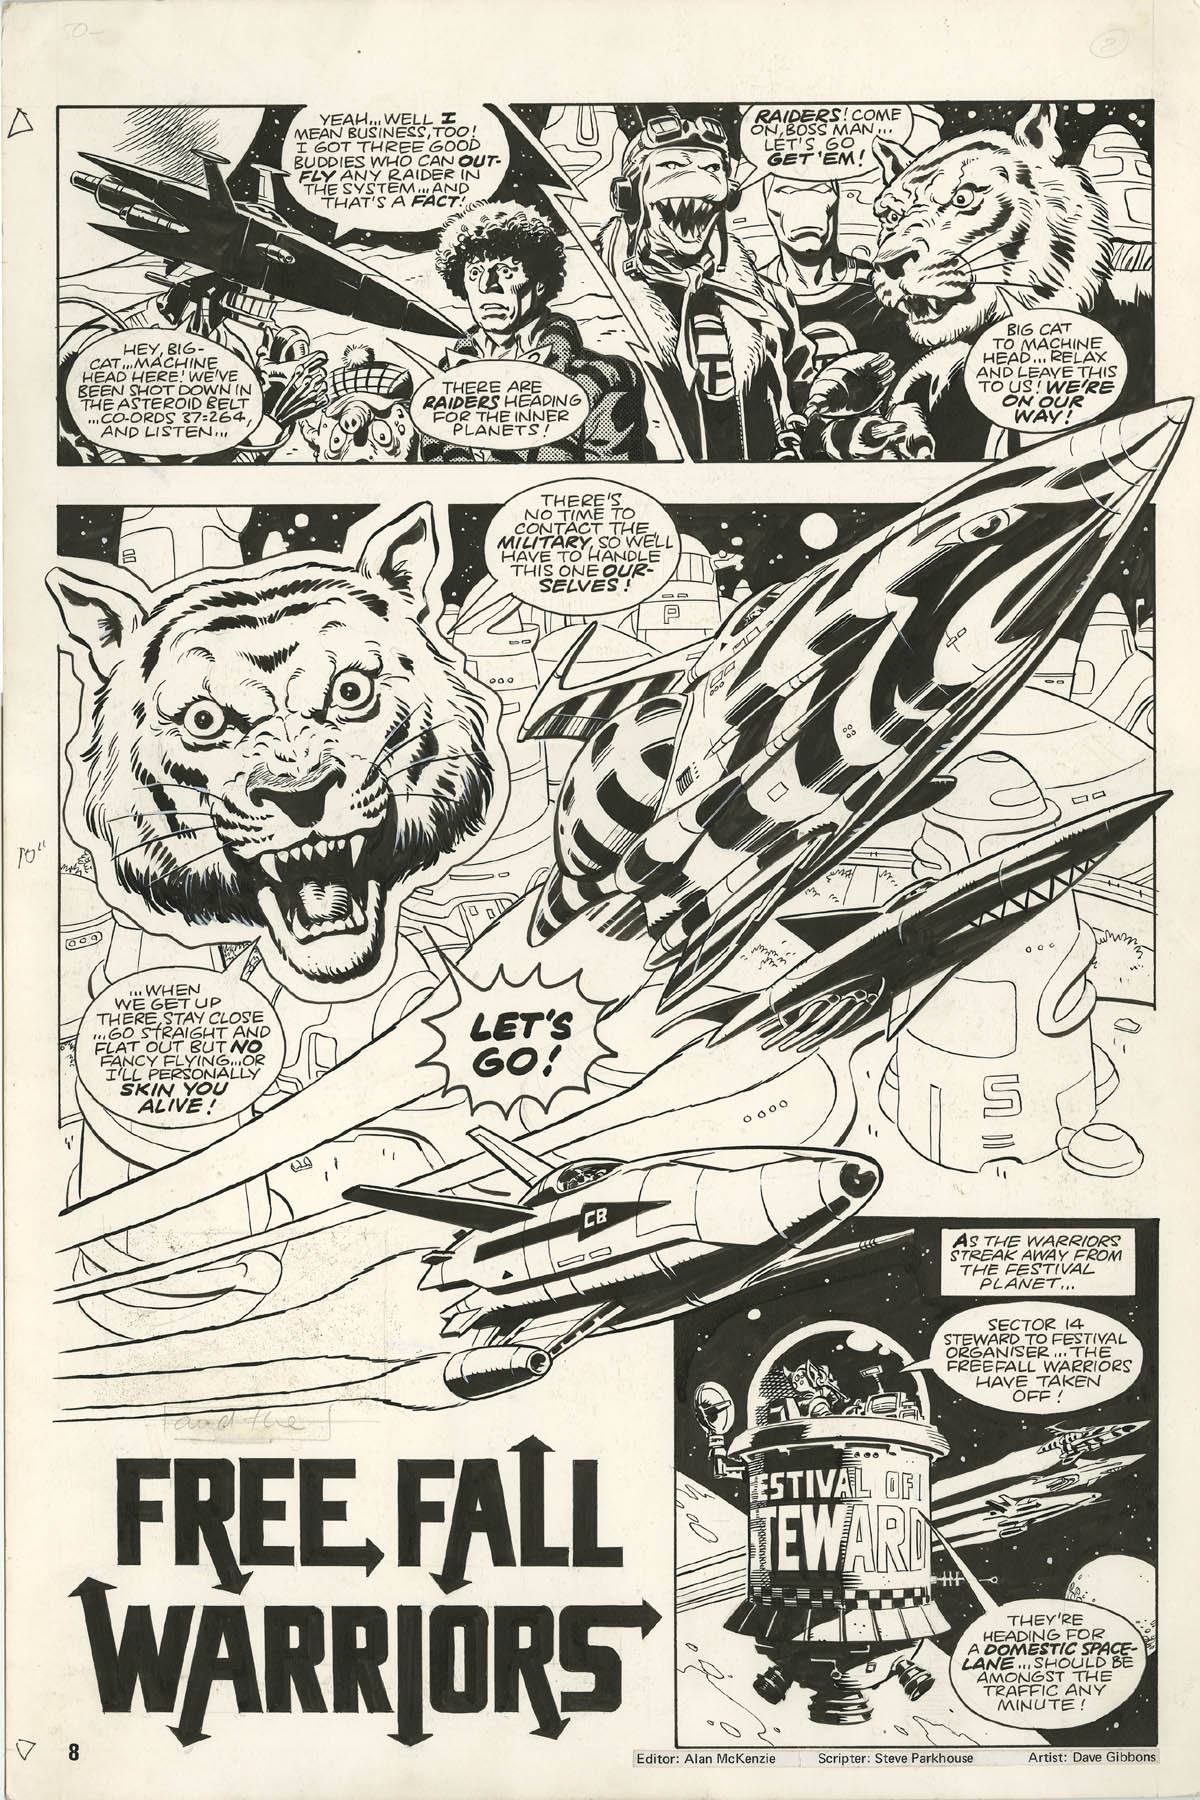 A page from "FreeFall Warriors" which first appeared in Doctor Who Monthly #57. Story by Steve Parkhouse, art by Dave Gibbons